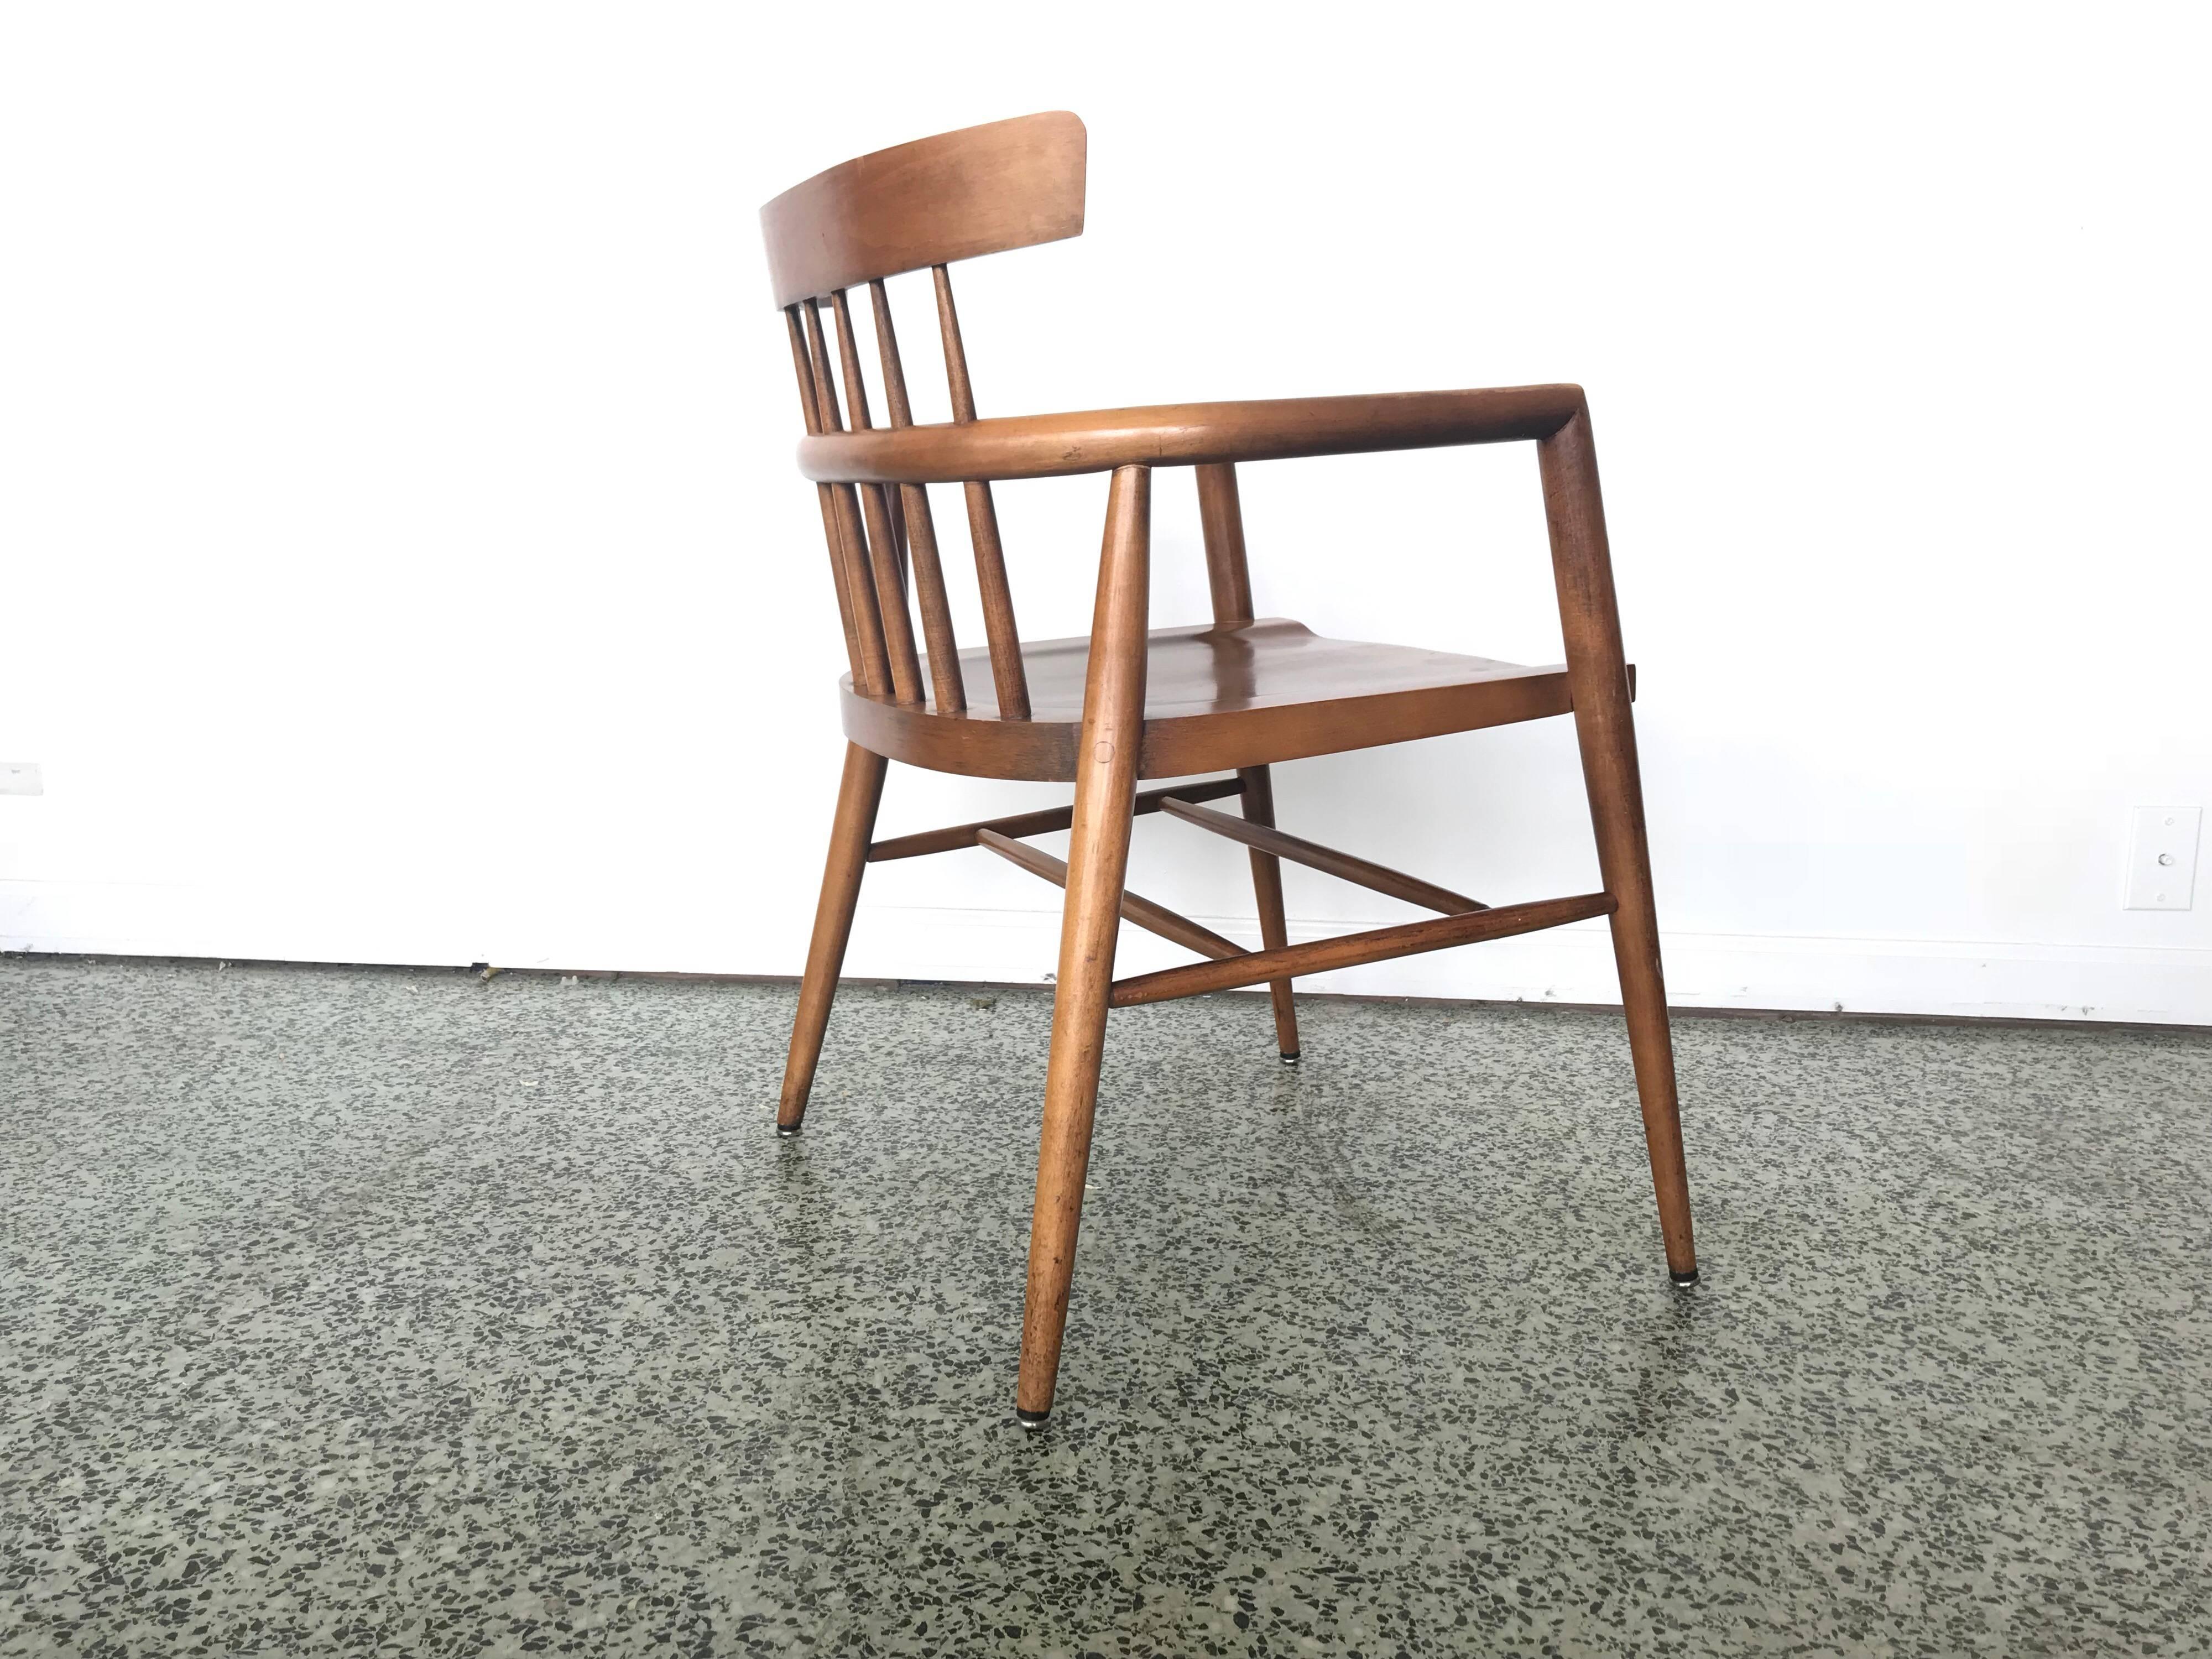 Designer: Paul McCobb
Manufacturer: Winchendon 
Period/style: Mid-Century Modern 
Country: US 
Date: 1950s.